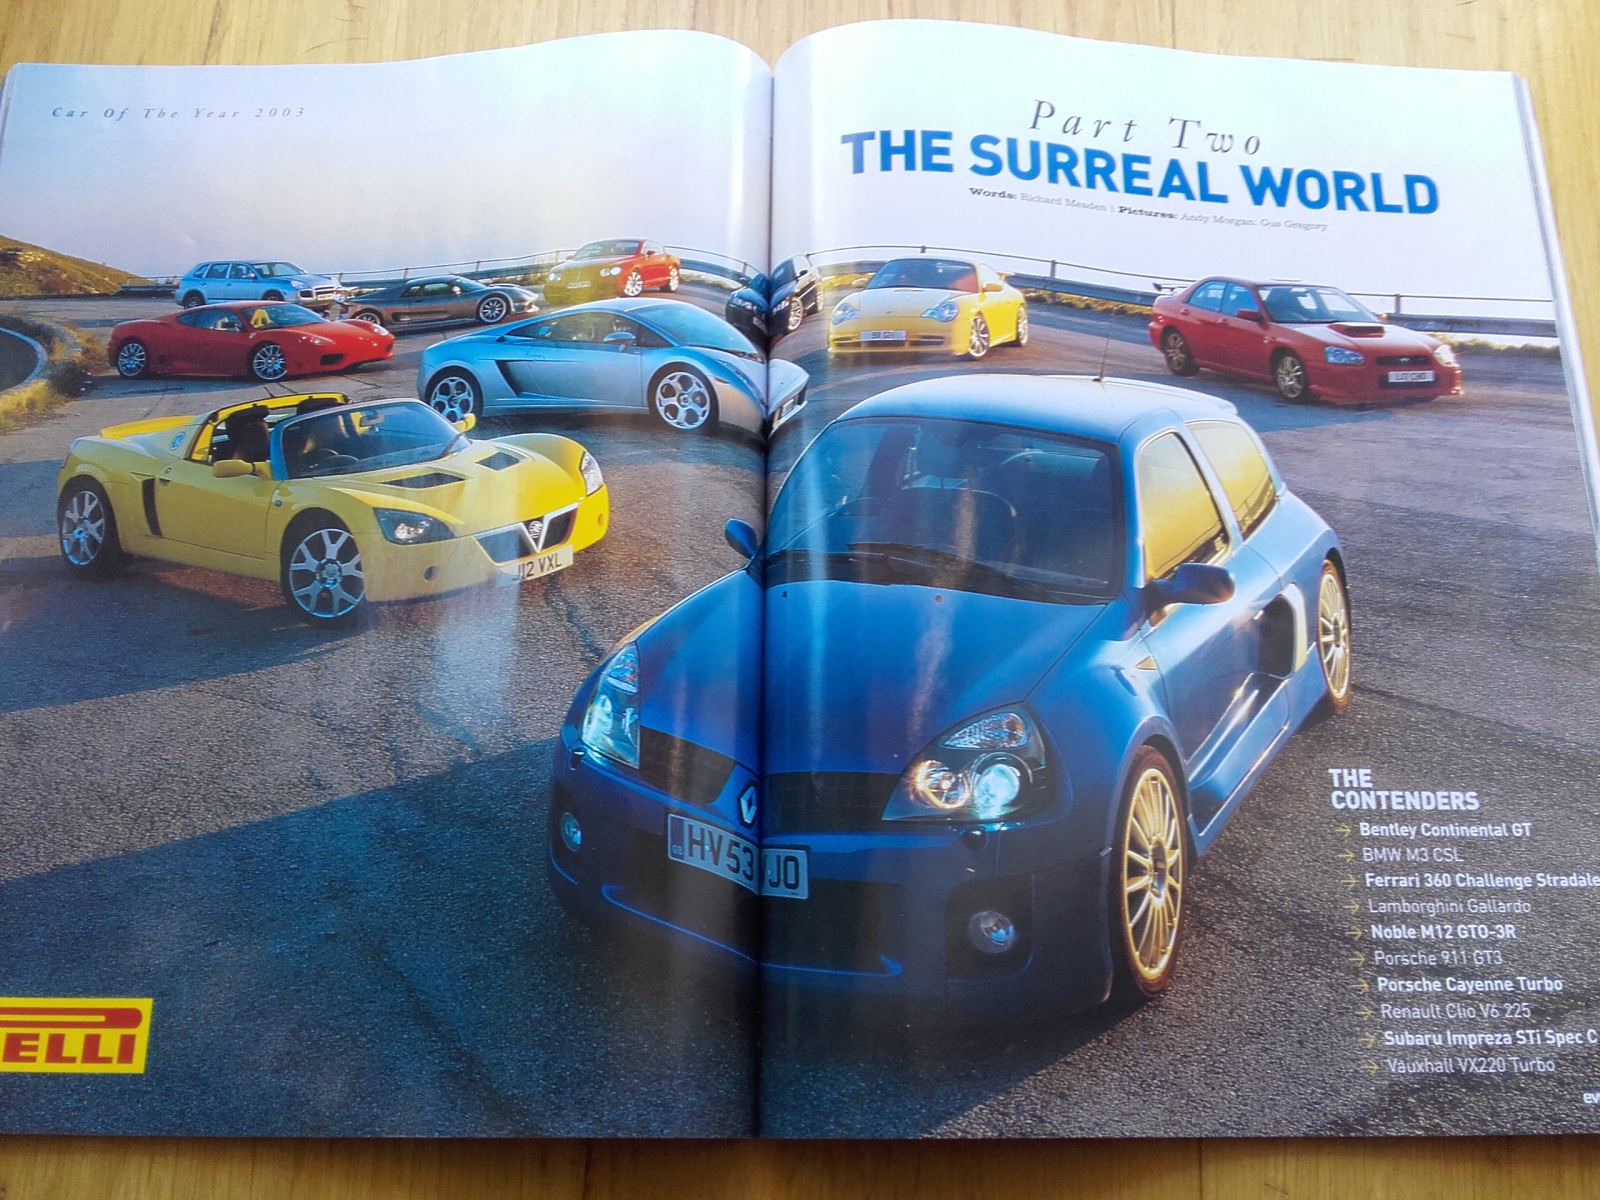 Renault Clio V6 255 - Page 3 - Readers' Cars - PistonHeads